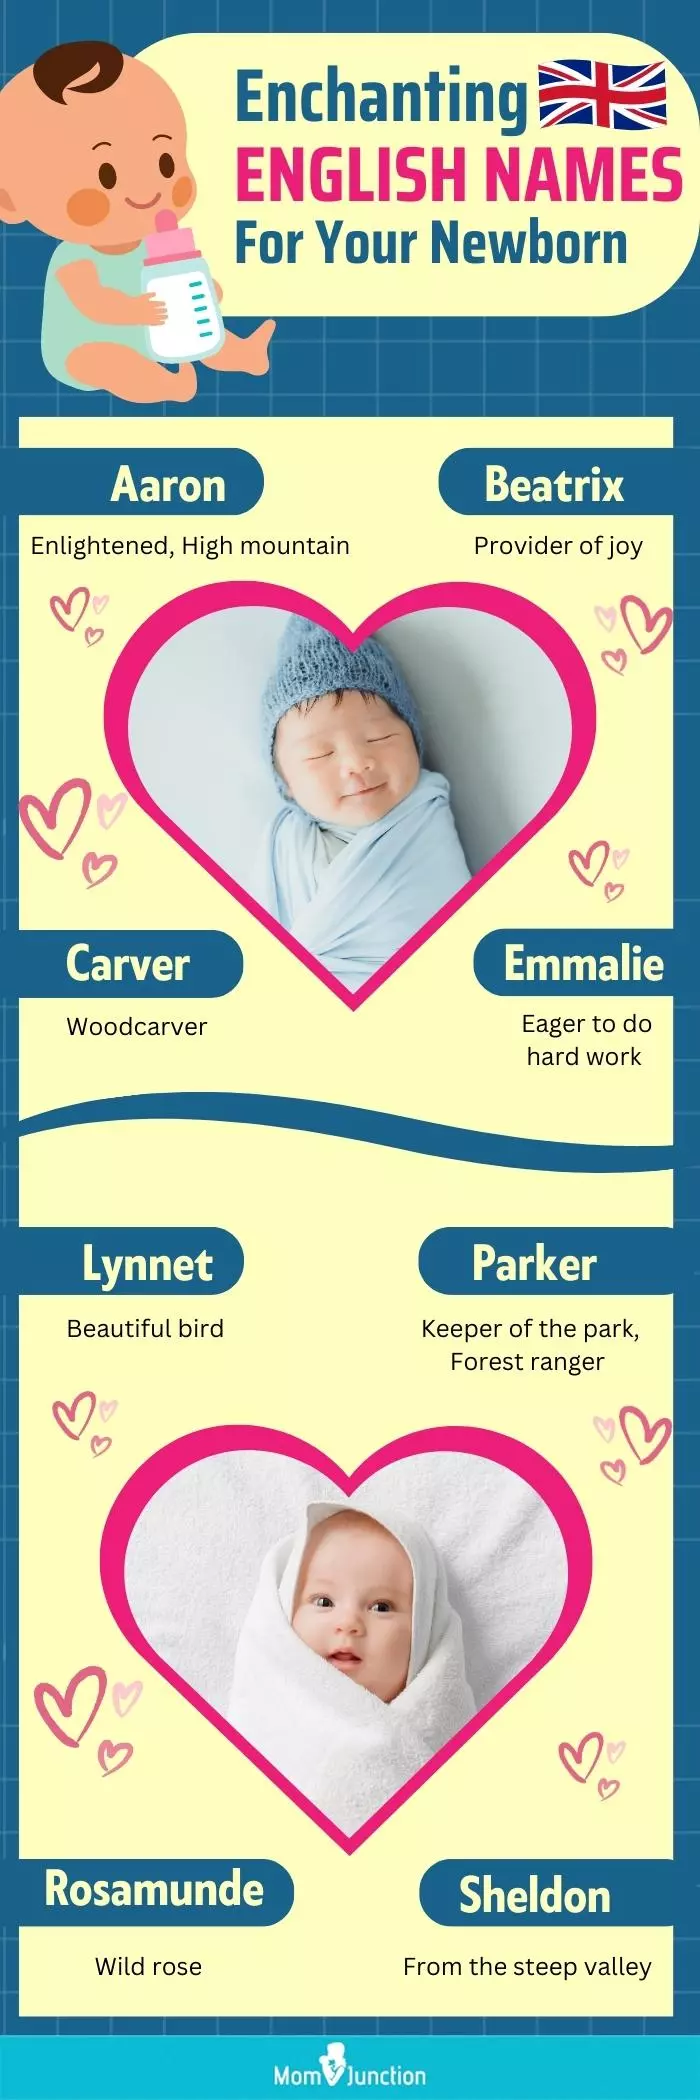 enchanting english names for your newborn (infographic)